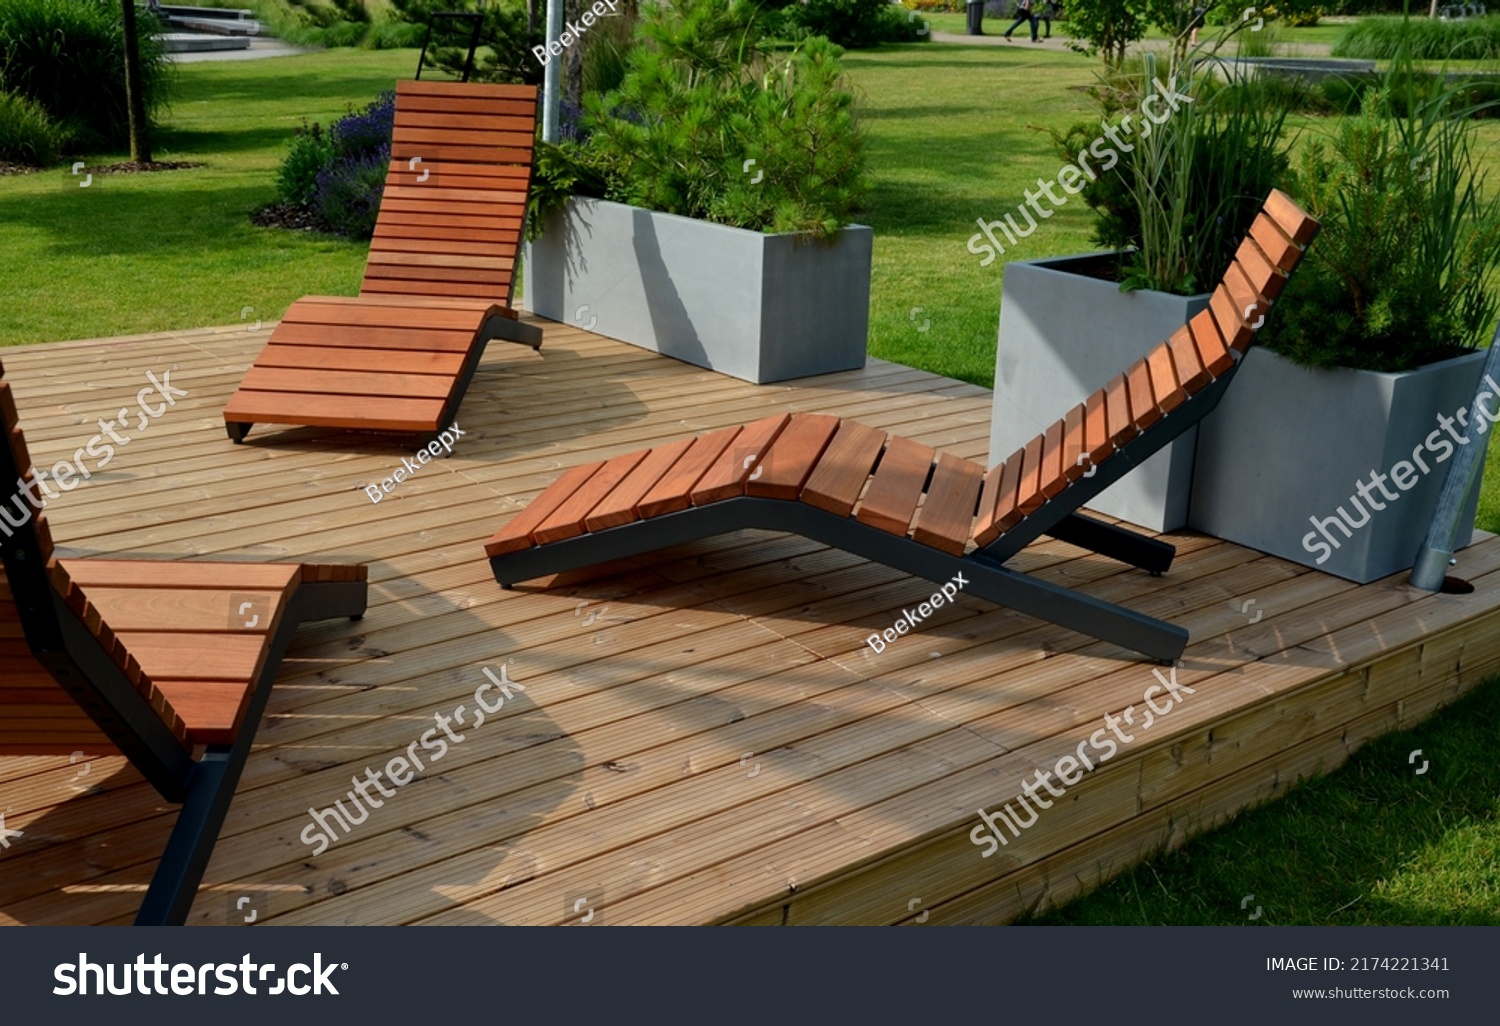 rocking chair on the pavement under the trees in the square. wooden deck chairs made of tropical wood for one person in the park. They are comfortable made of brown planks, slats steel frames, pine #2174221341